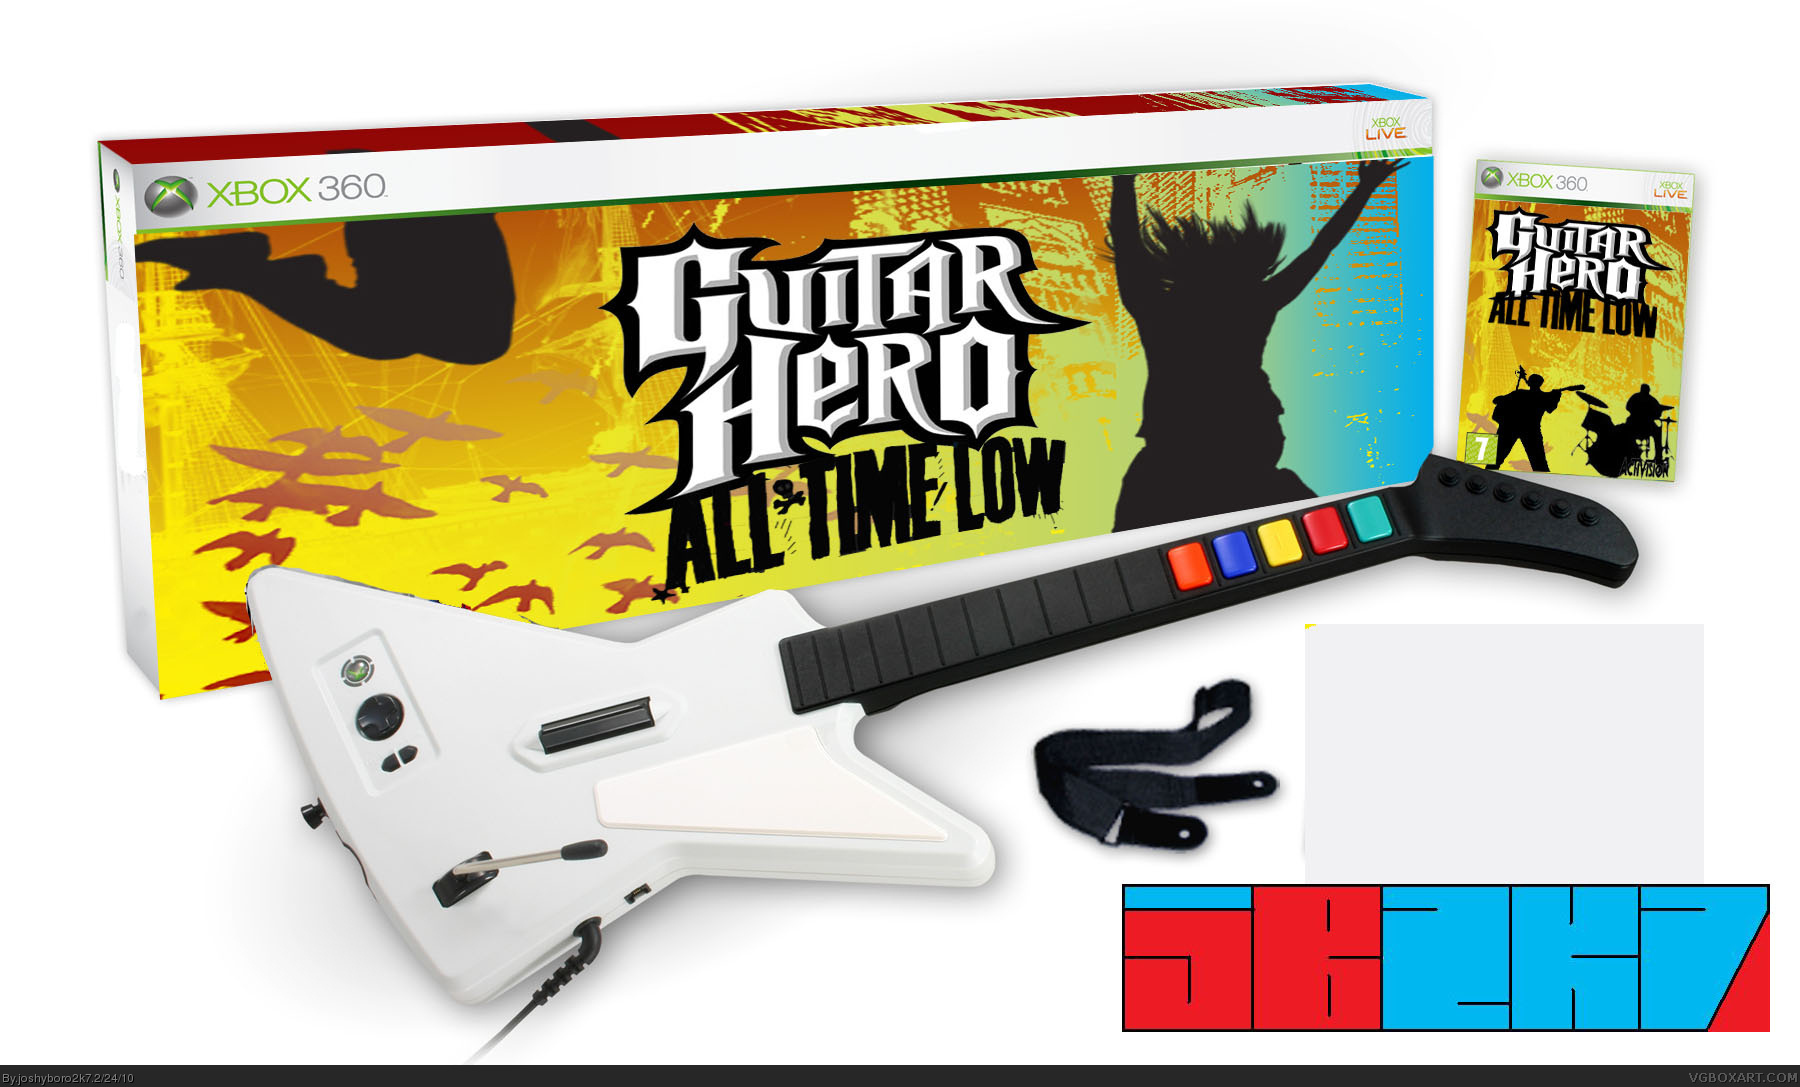 Guitar Hero: All Time Low box cover